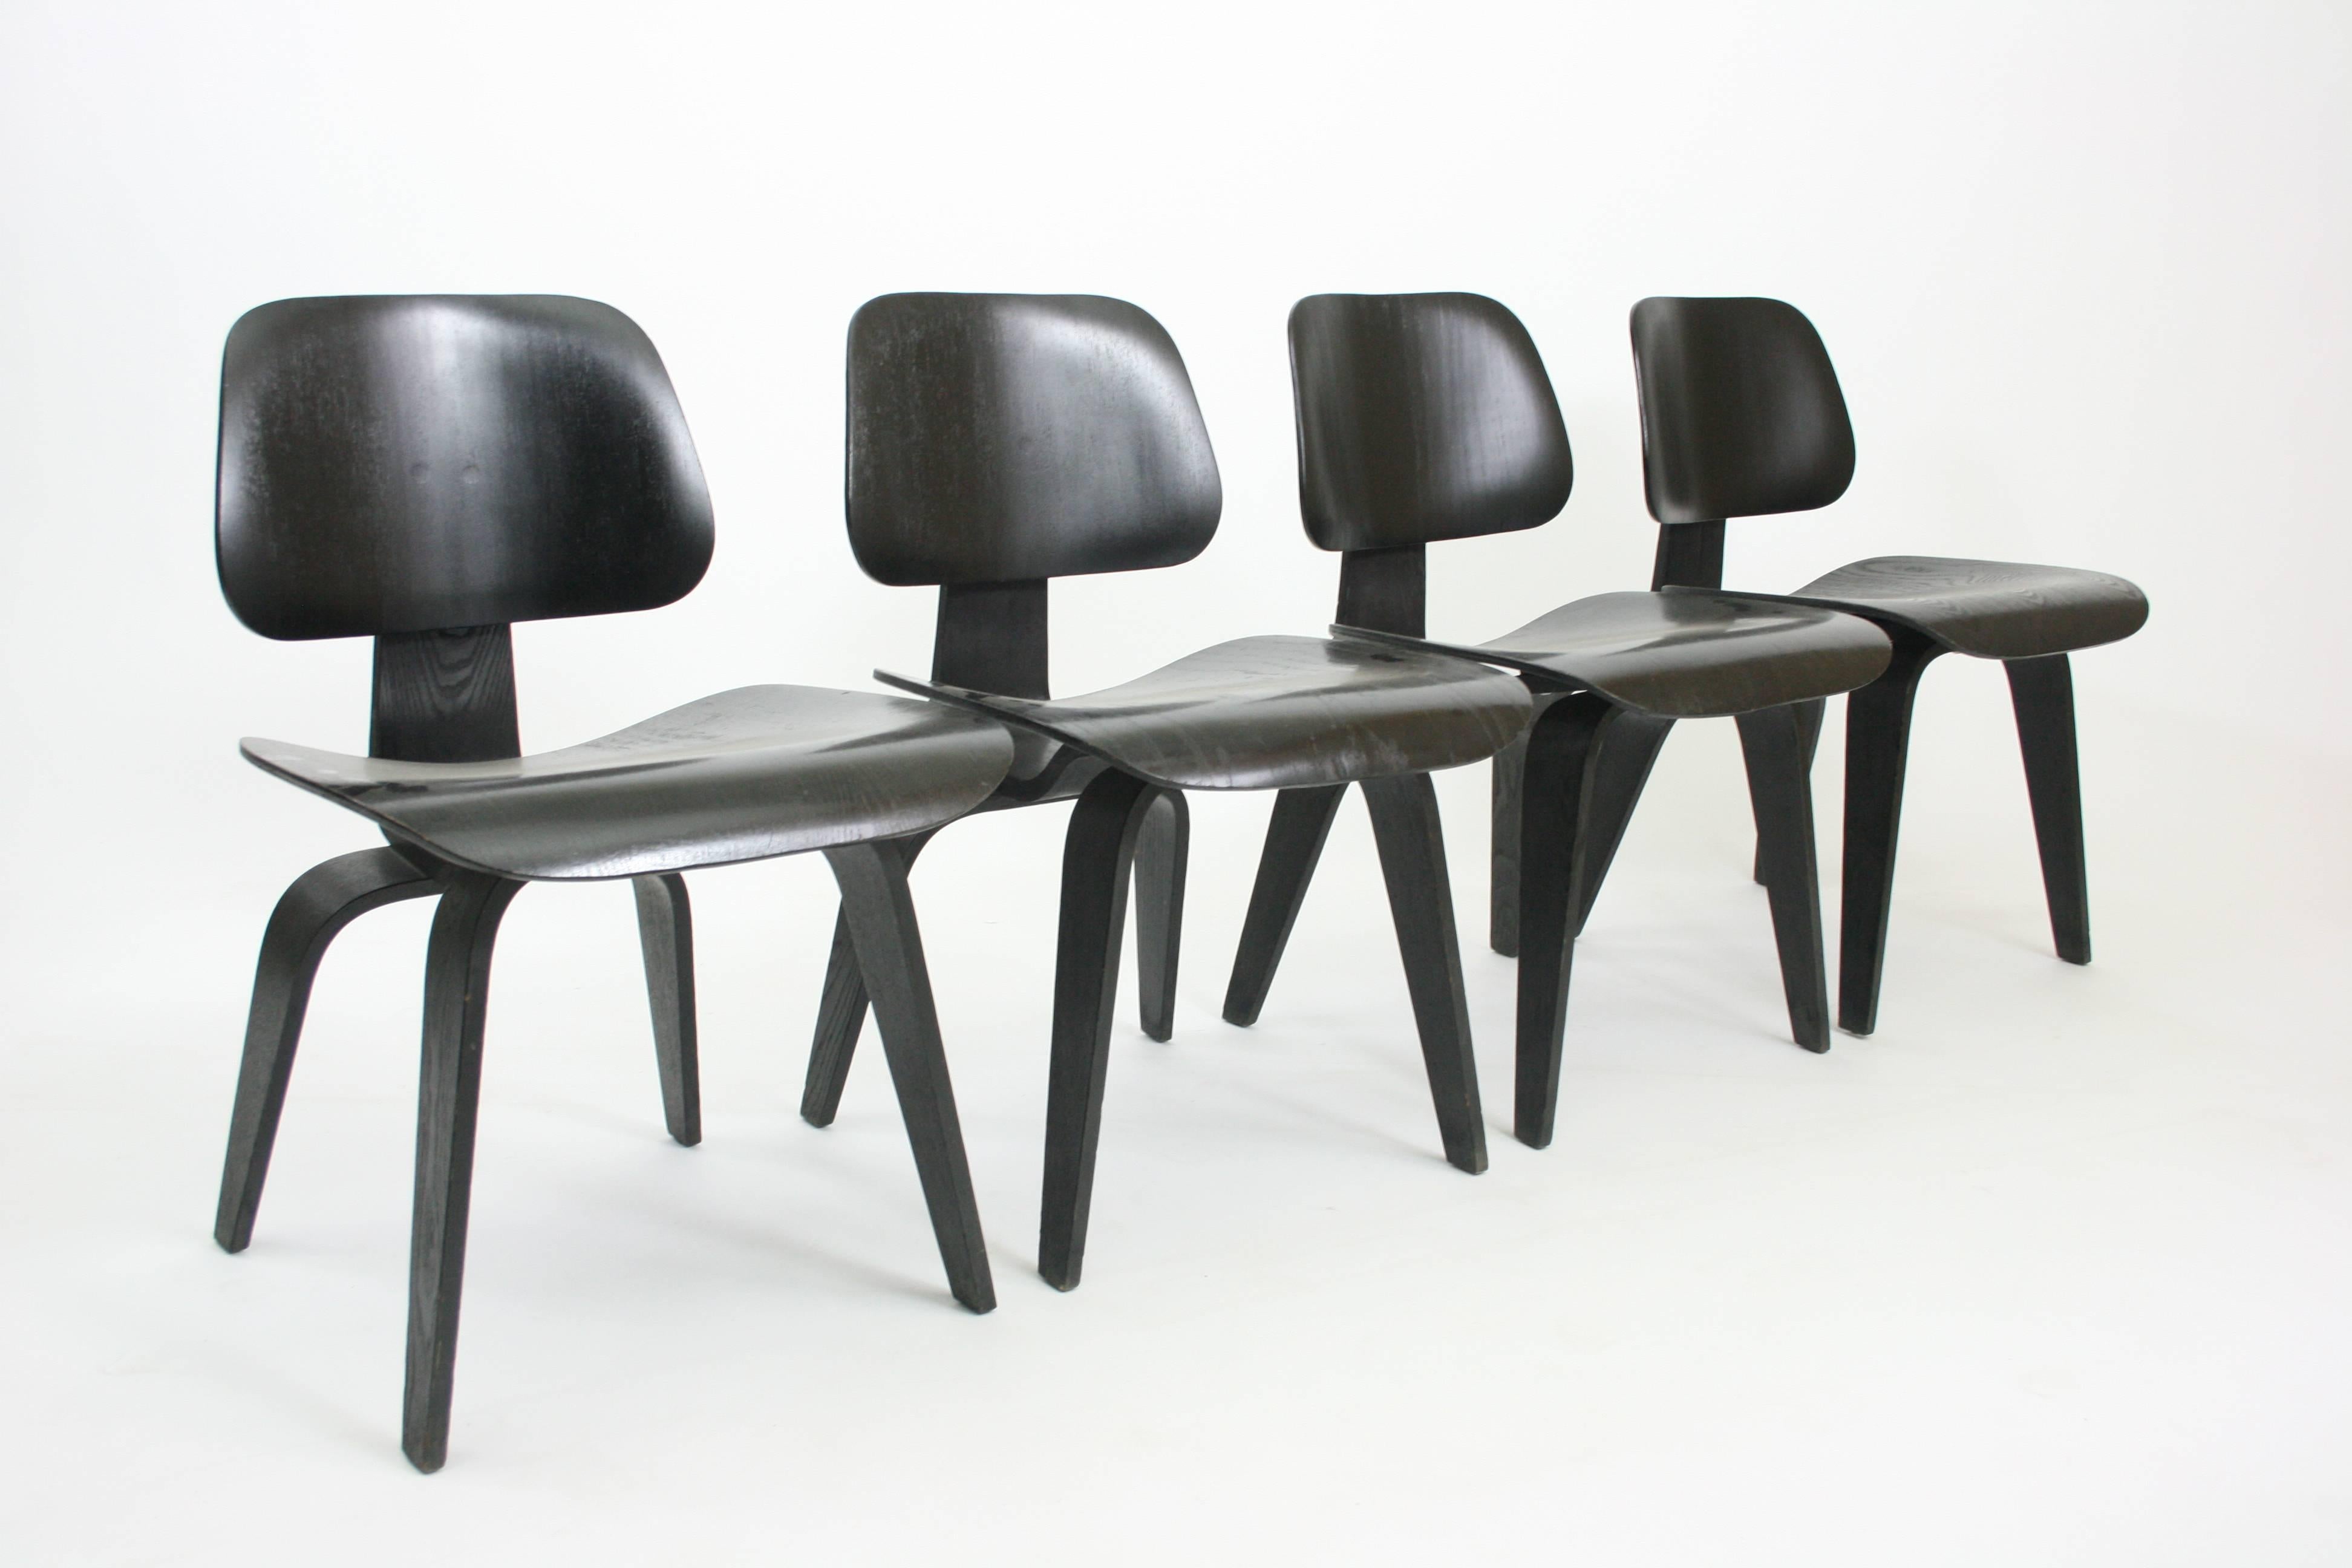 A great vintage set of Eames D.C.W. (dining chair wood) chairs in ebony for Evans products for Herman Miller. This set maintains all original hardware and shock-mounts and is the 5-2-4 bolt pattern which indicates the earliest examples of these